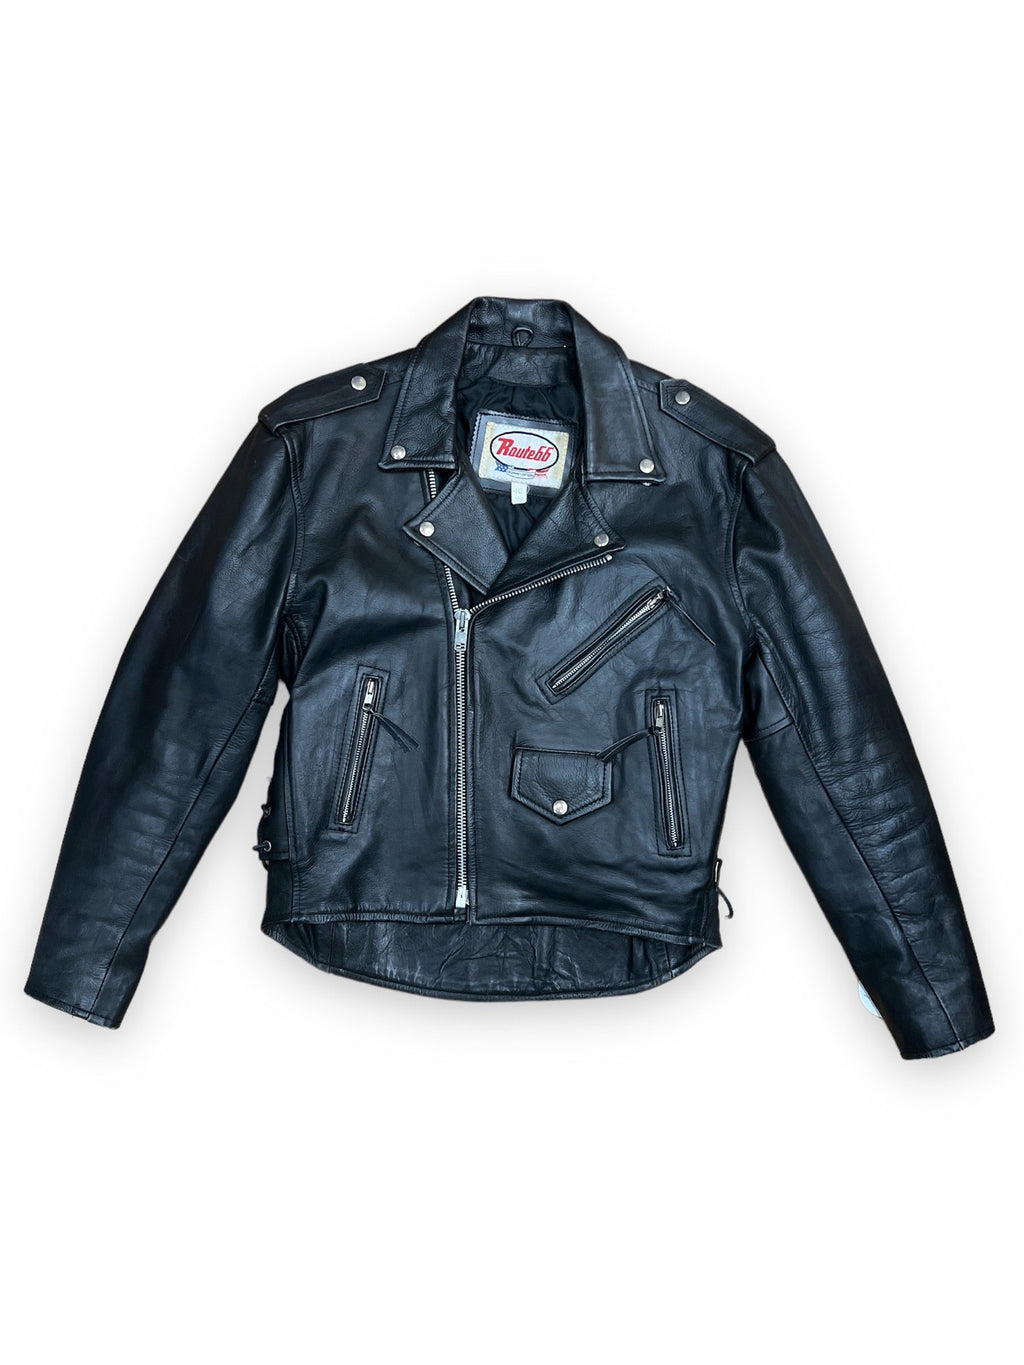 ROUTE 66 LEATHER MOTORCYCLE JACKET